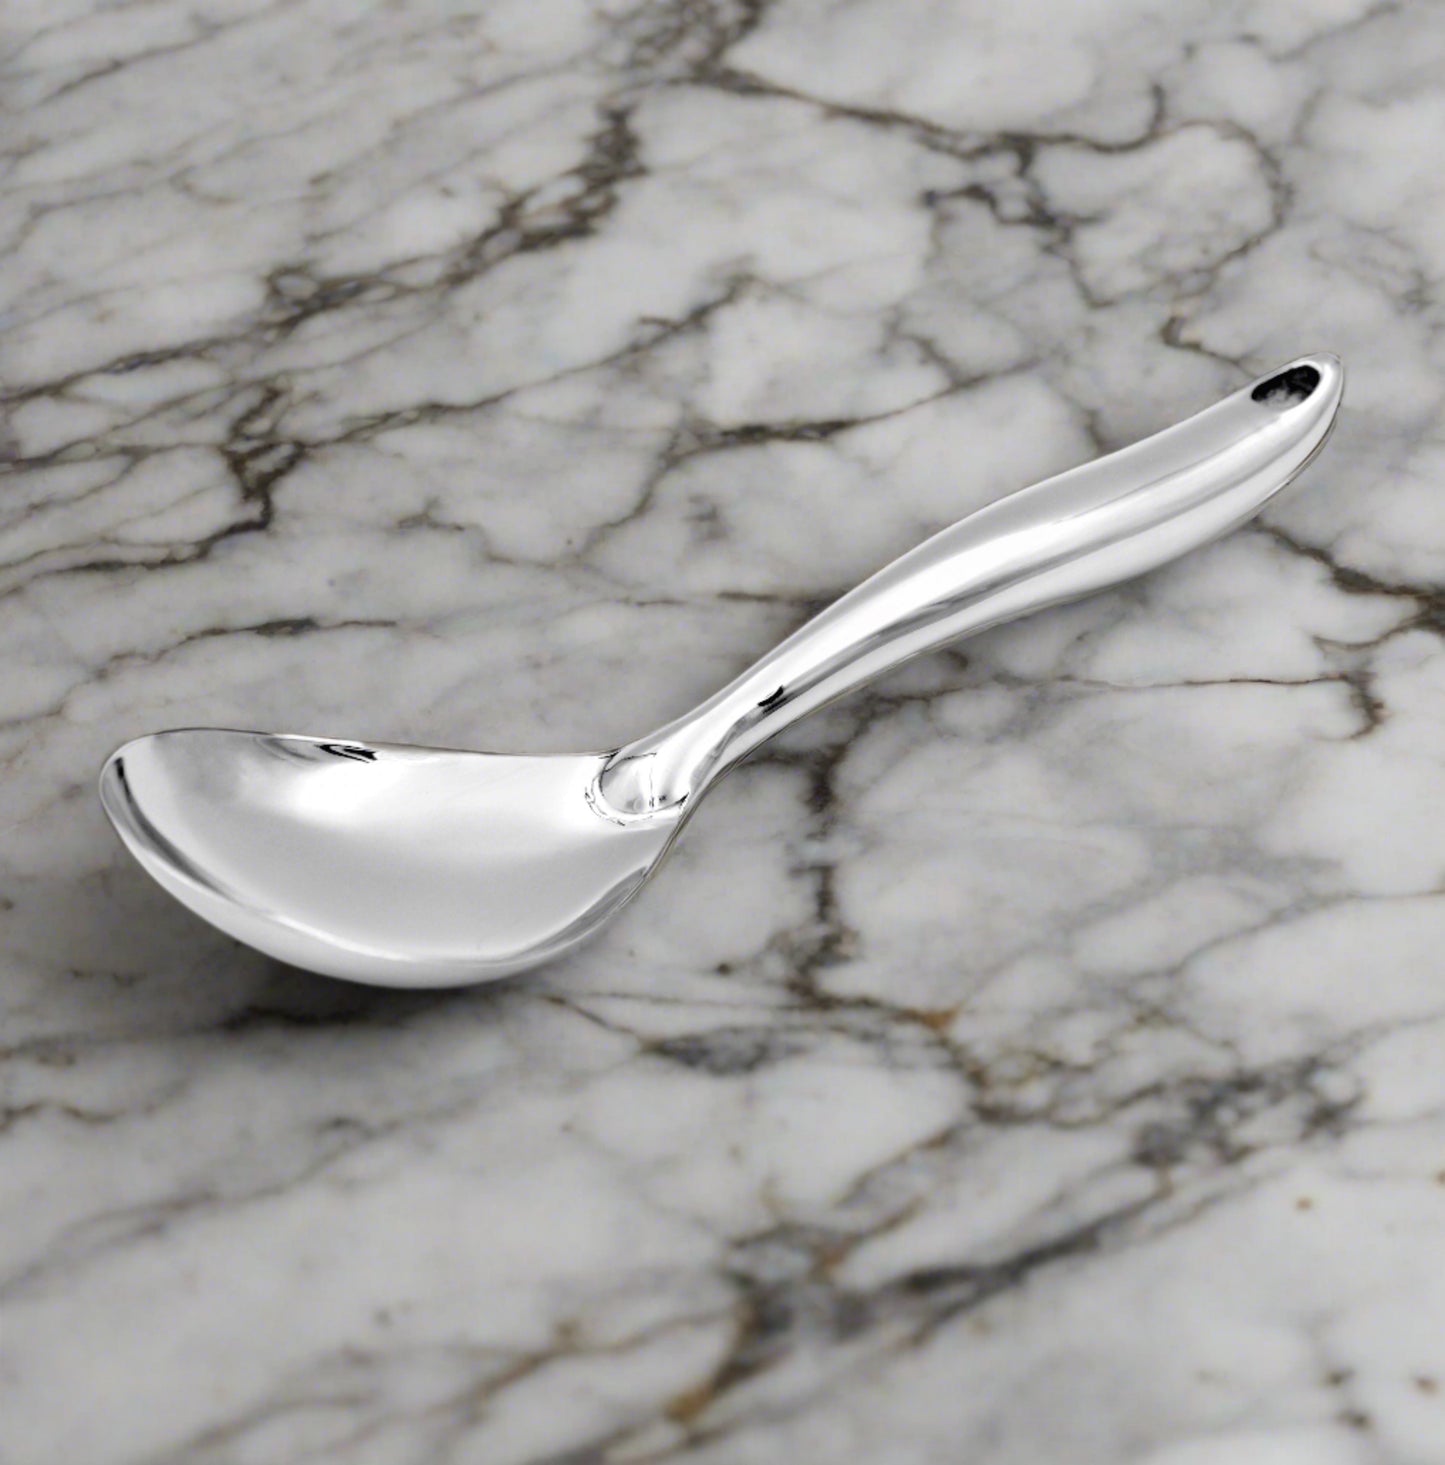 Large rice serving spoon